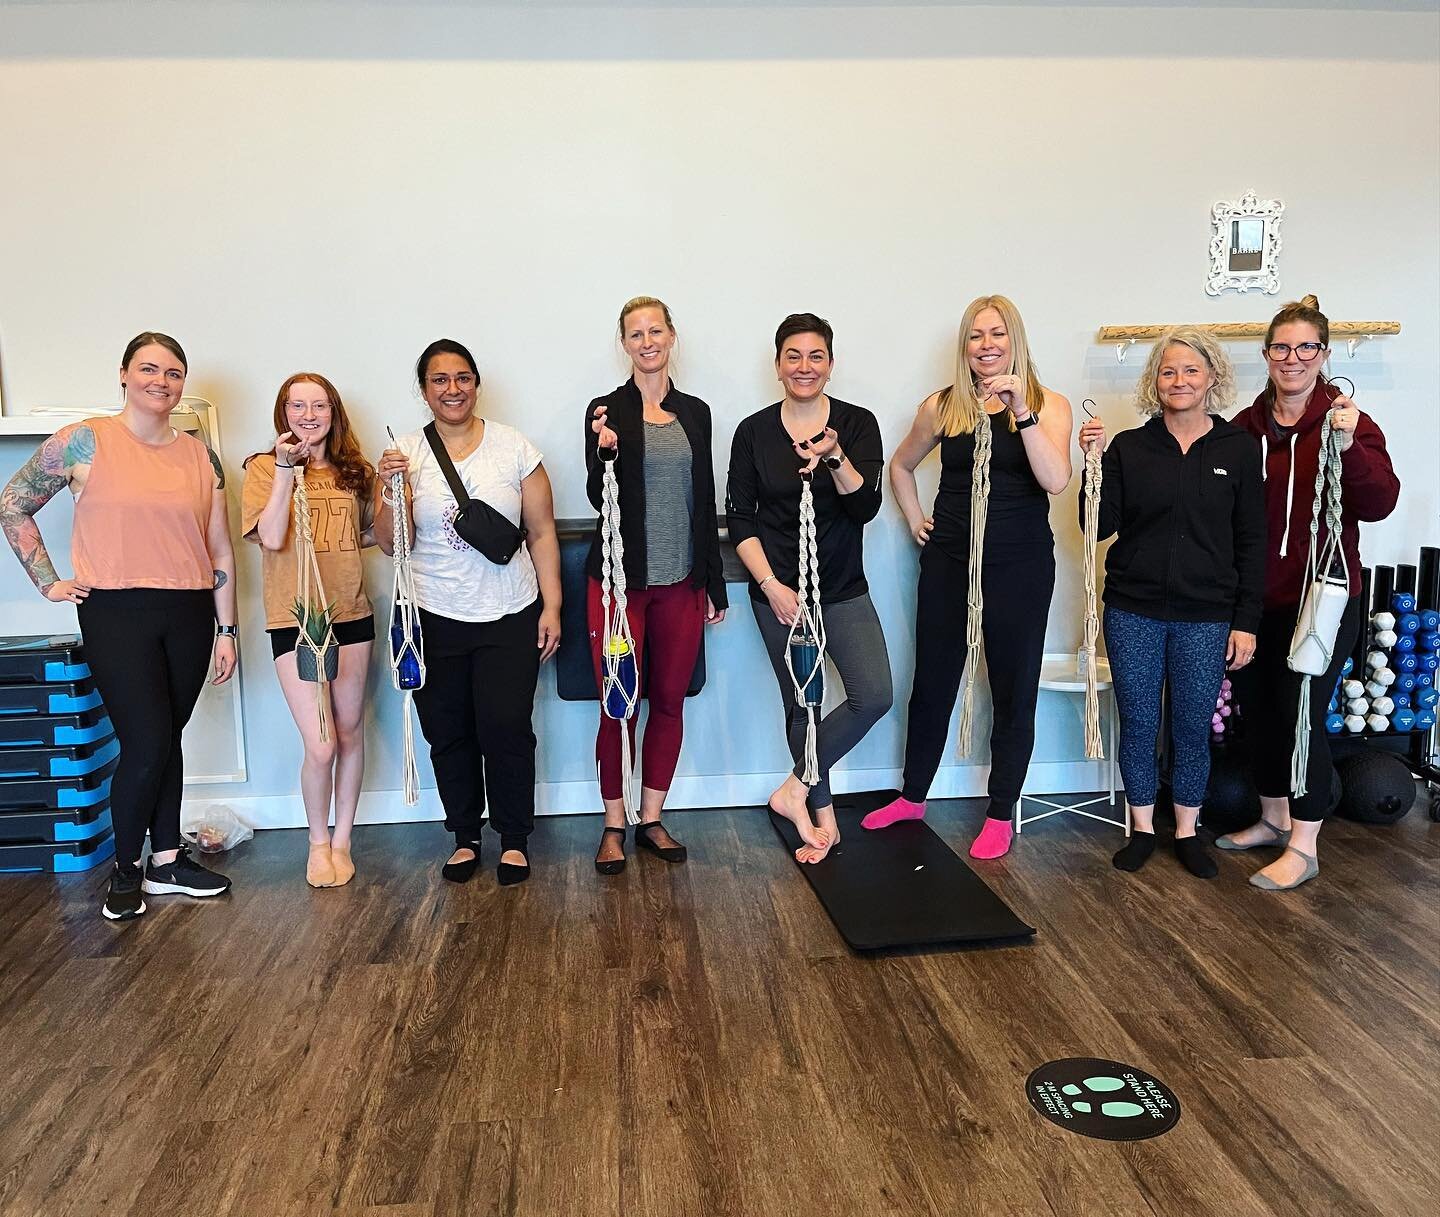 Such a fun evening at the studio for our BARRE THEN&hellip;MACRAM&Eacute; event!

A big thank you 🙏 to Jamye from @cheridesignco for teaching the macram&eacute; workshop, and Tina for kicking our butts in an awesome FORM Barre 👯&zwj;♀️express class